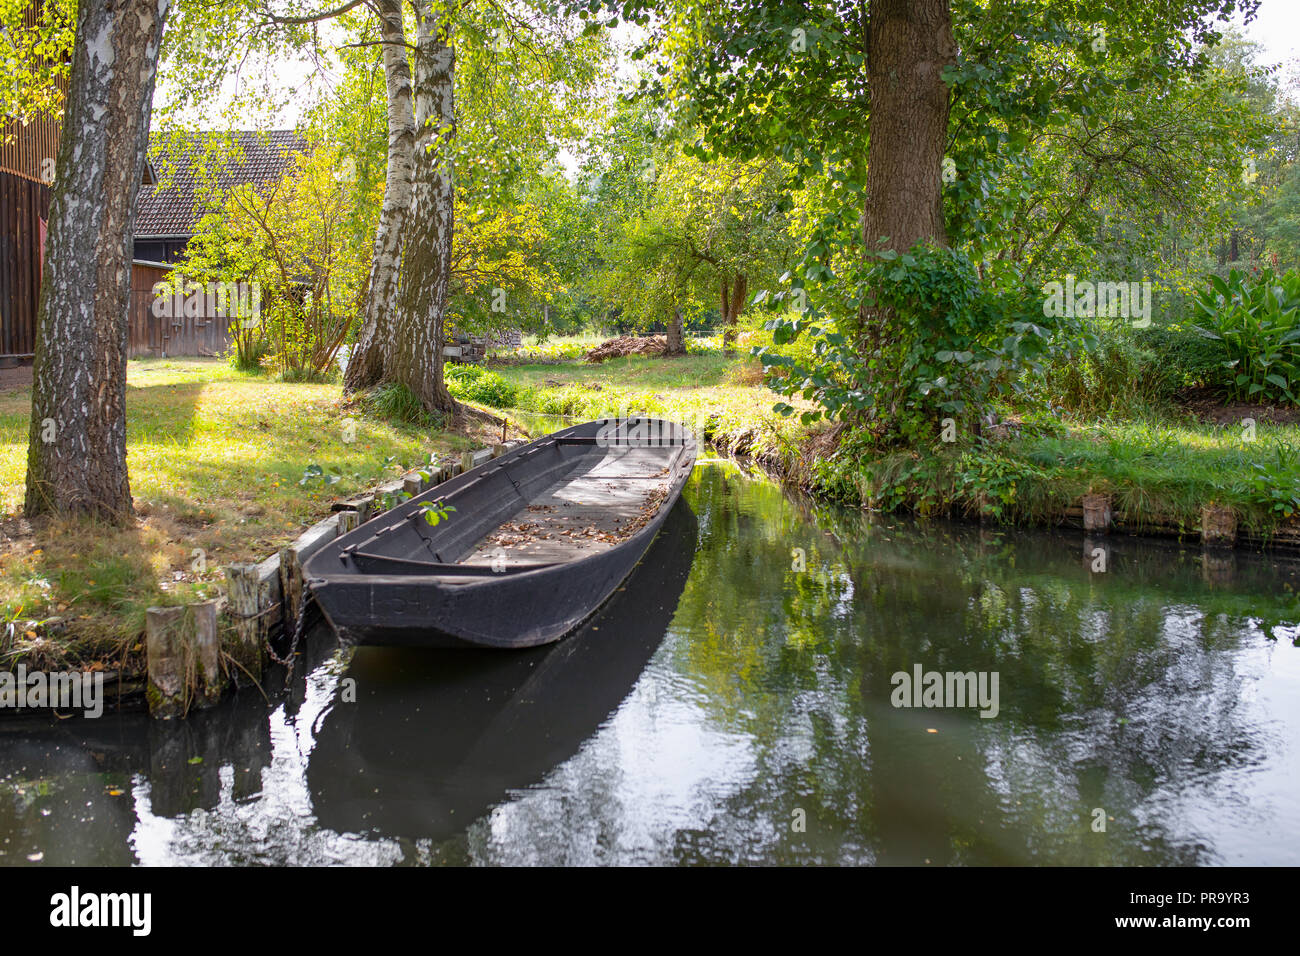 Lehde, Spreewald / Germany.  Typical Spreewald landscape. Canals, vivid plants and wooden architecture. Stock Photo